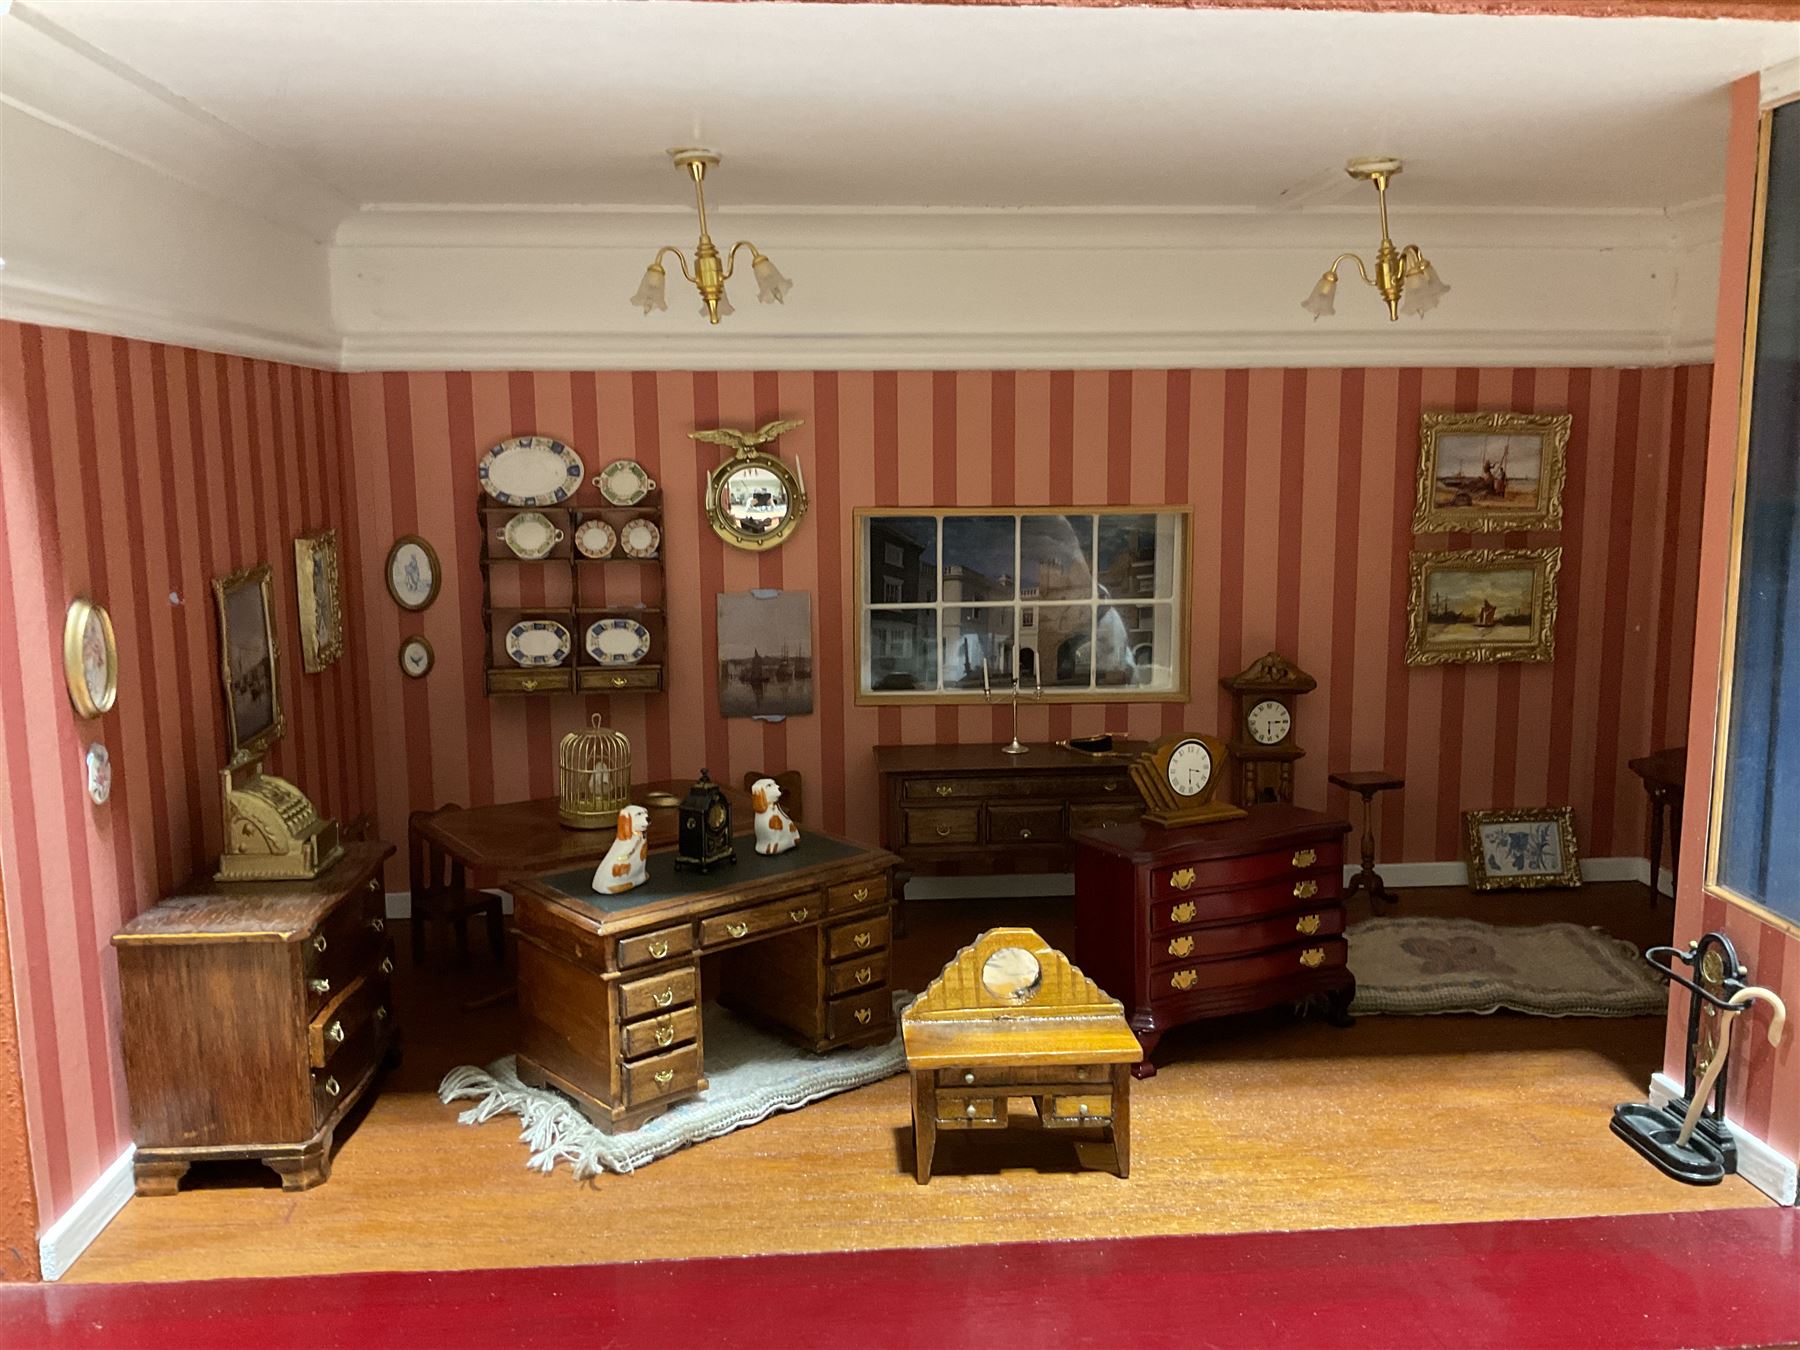 Good quality late 20th century dolls house by M. James dated 1995 in the form of a Beverley East Yor - Image 6 of 16